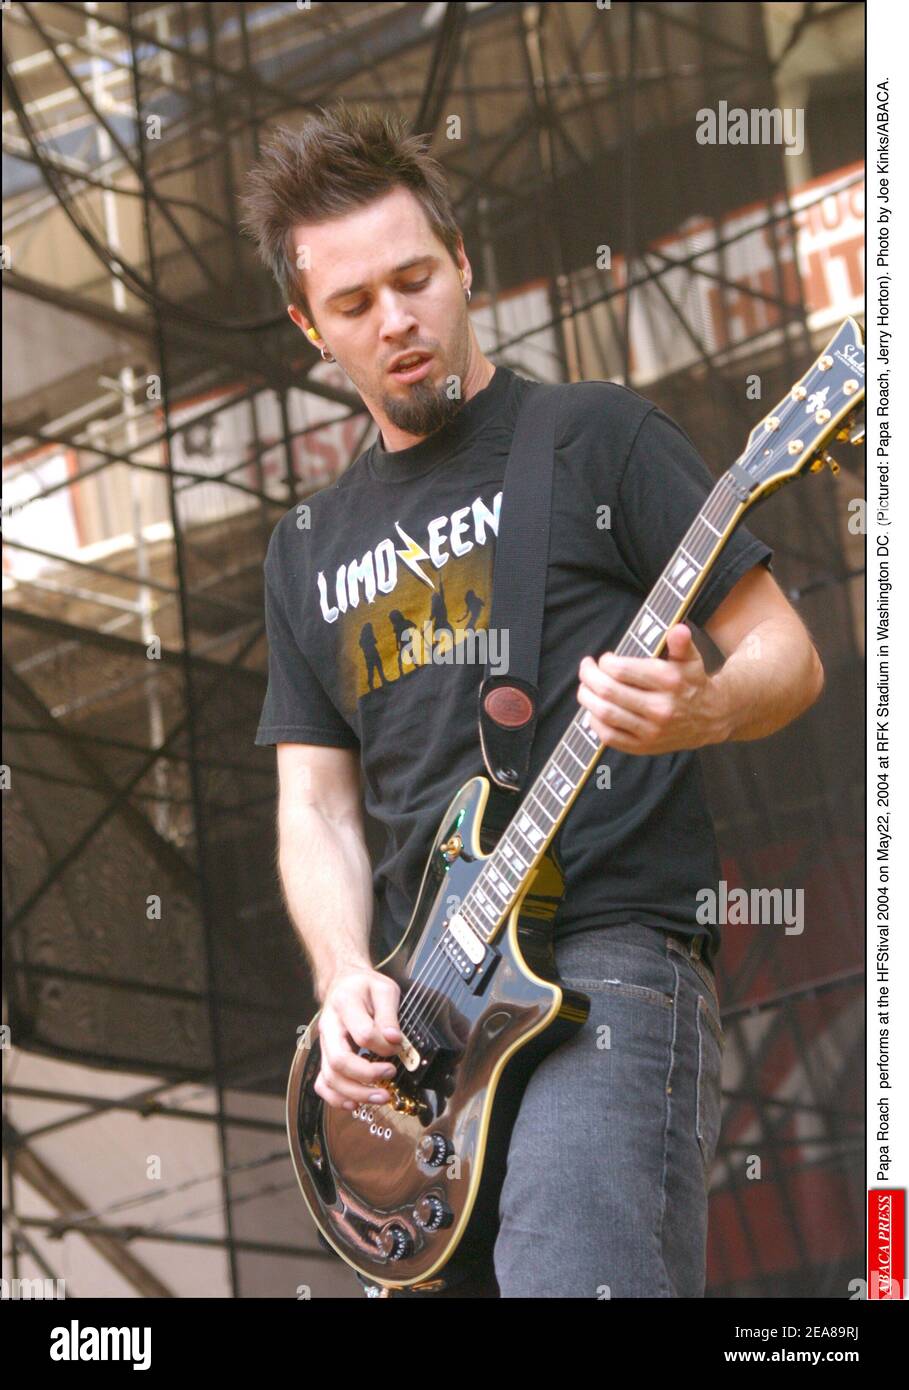 Papa Roach performs at the HFStival 2004 on May22, 2004 at RFK Stadium in Washington DC. (Pictured: Papa Roach, Jerry Horton). Photo by Joe Kinks/ABACA. Stock Photo